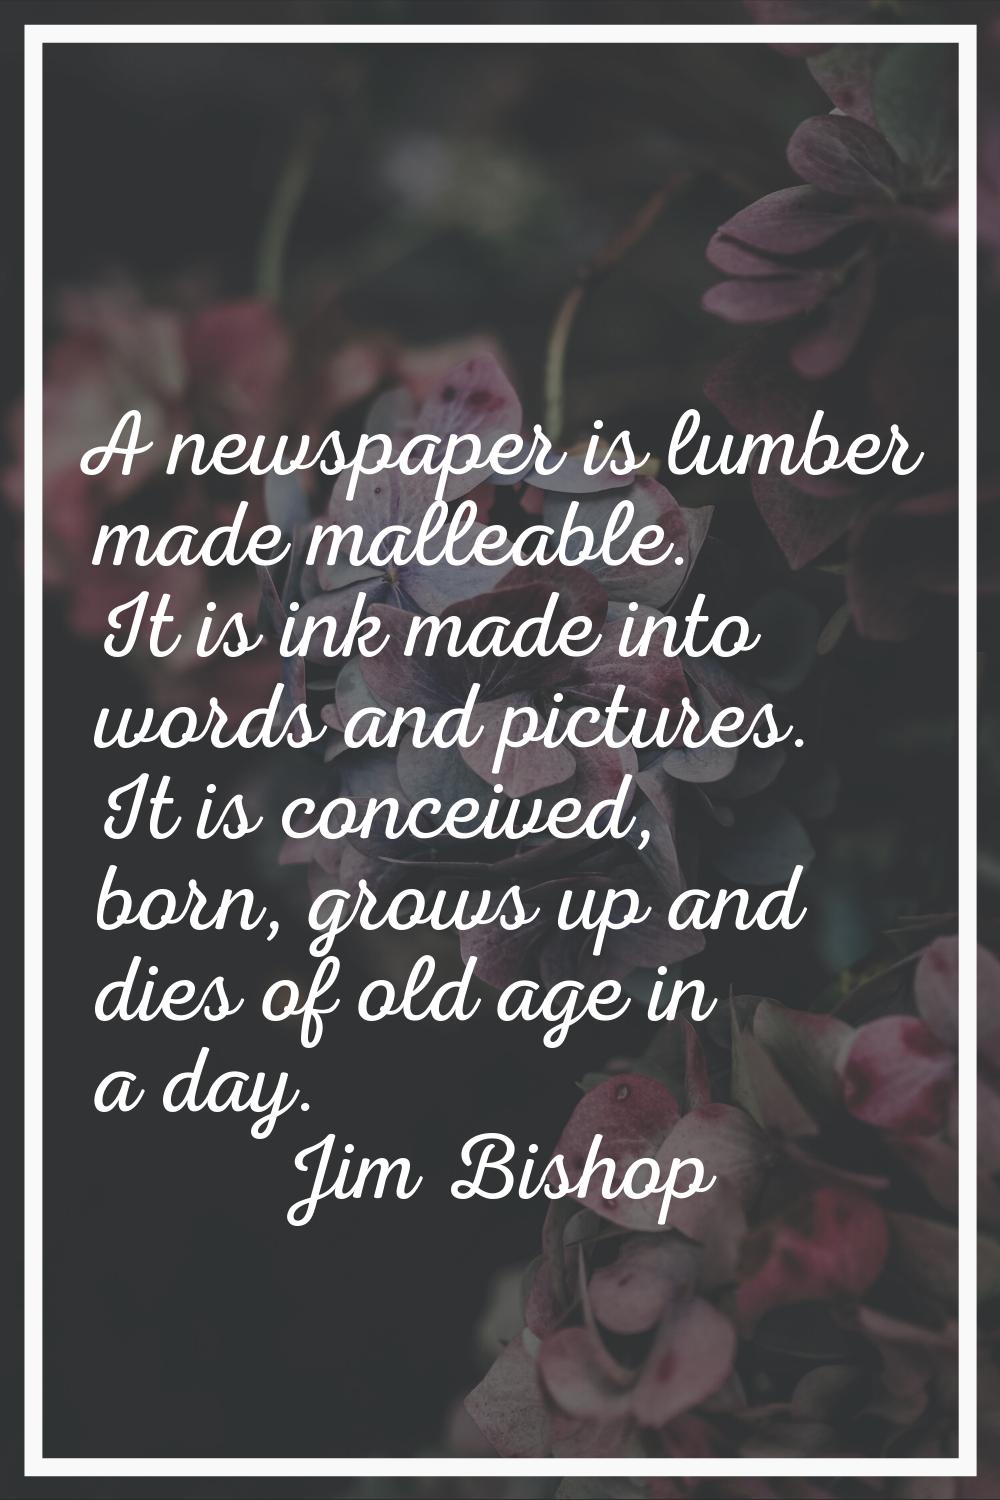 A newspaper is lumber made malleable. It is ink made into words and pictures. It is conceived, born